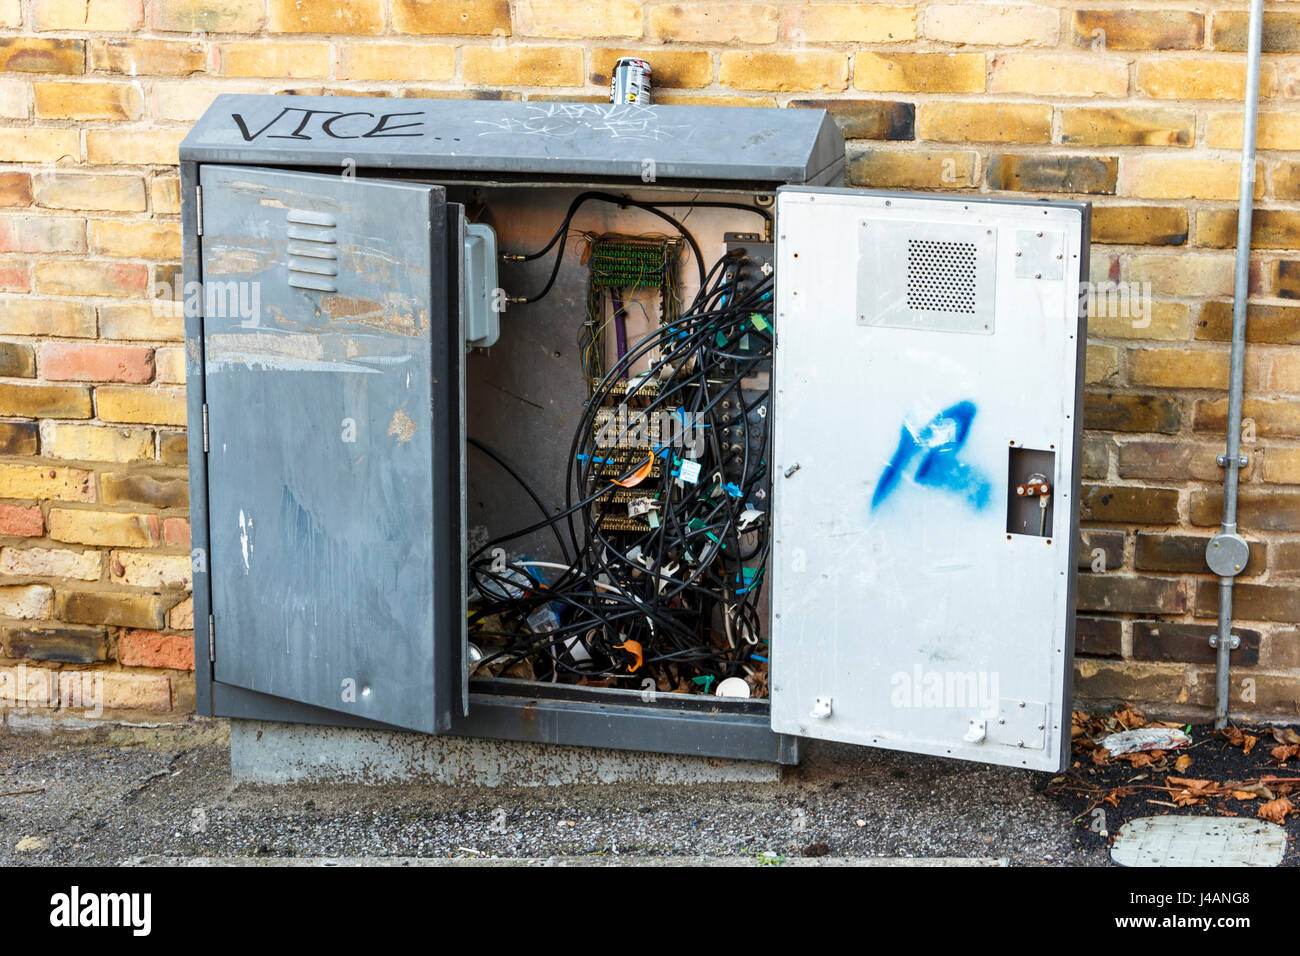 A roadside telecoms box with the door open, showing a tangle of wires and cables inside, London, UK Stock Photo